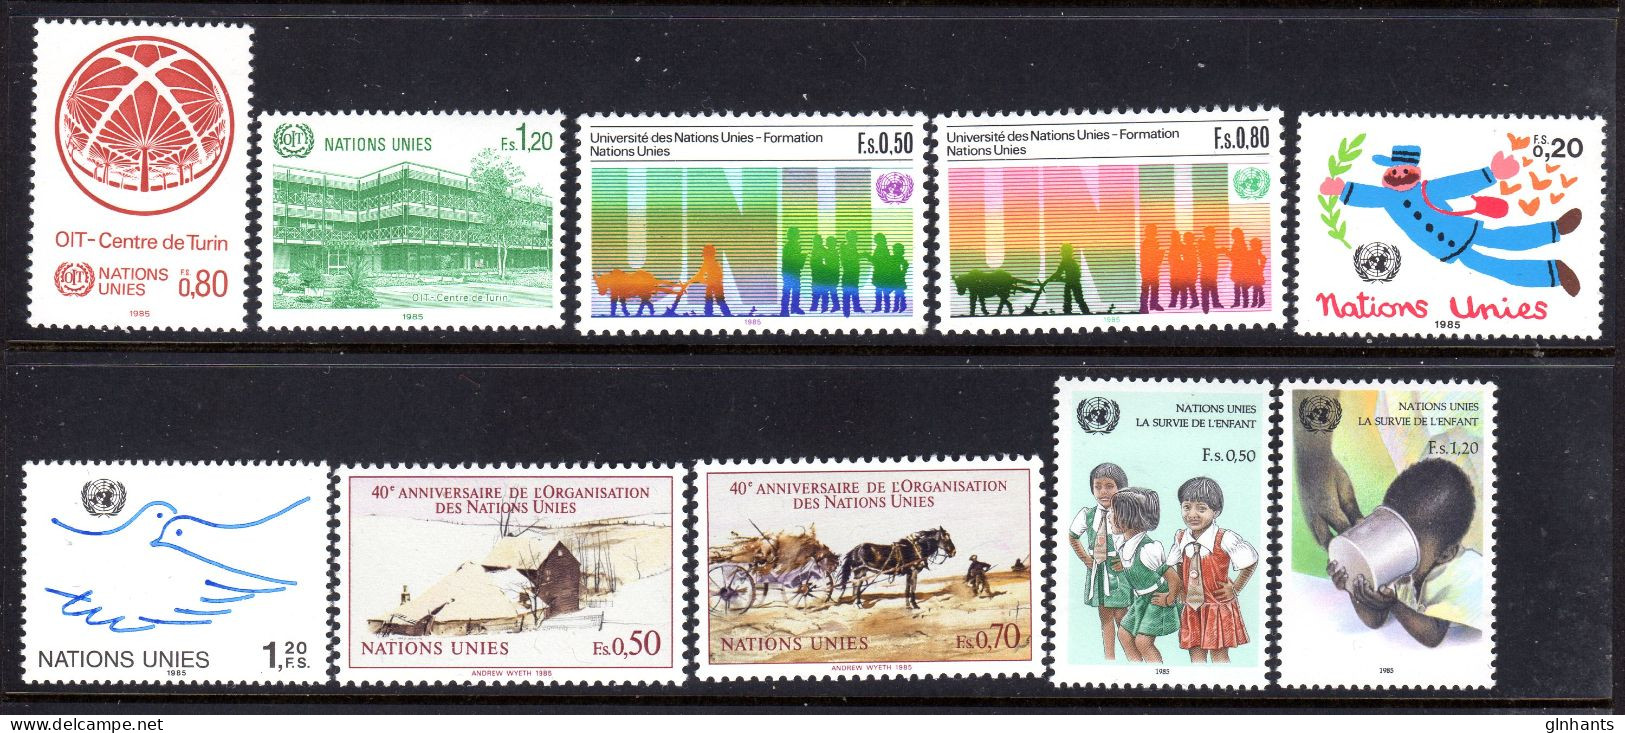 UNITED NATIONS UN GENEVA - 1985 COMPLETE YEAR SET (10V) AS PICTURED FINE MNH ** SG G129-G136, G138-G139 - Unused Stamps